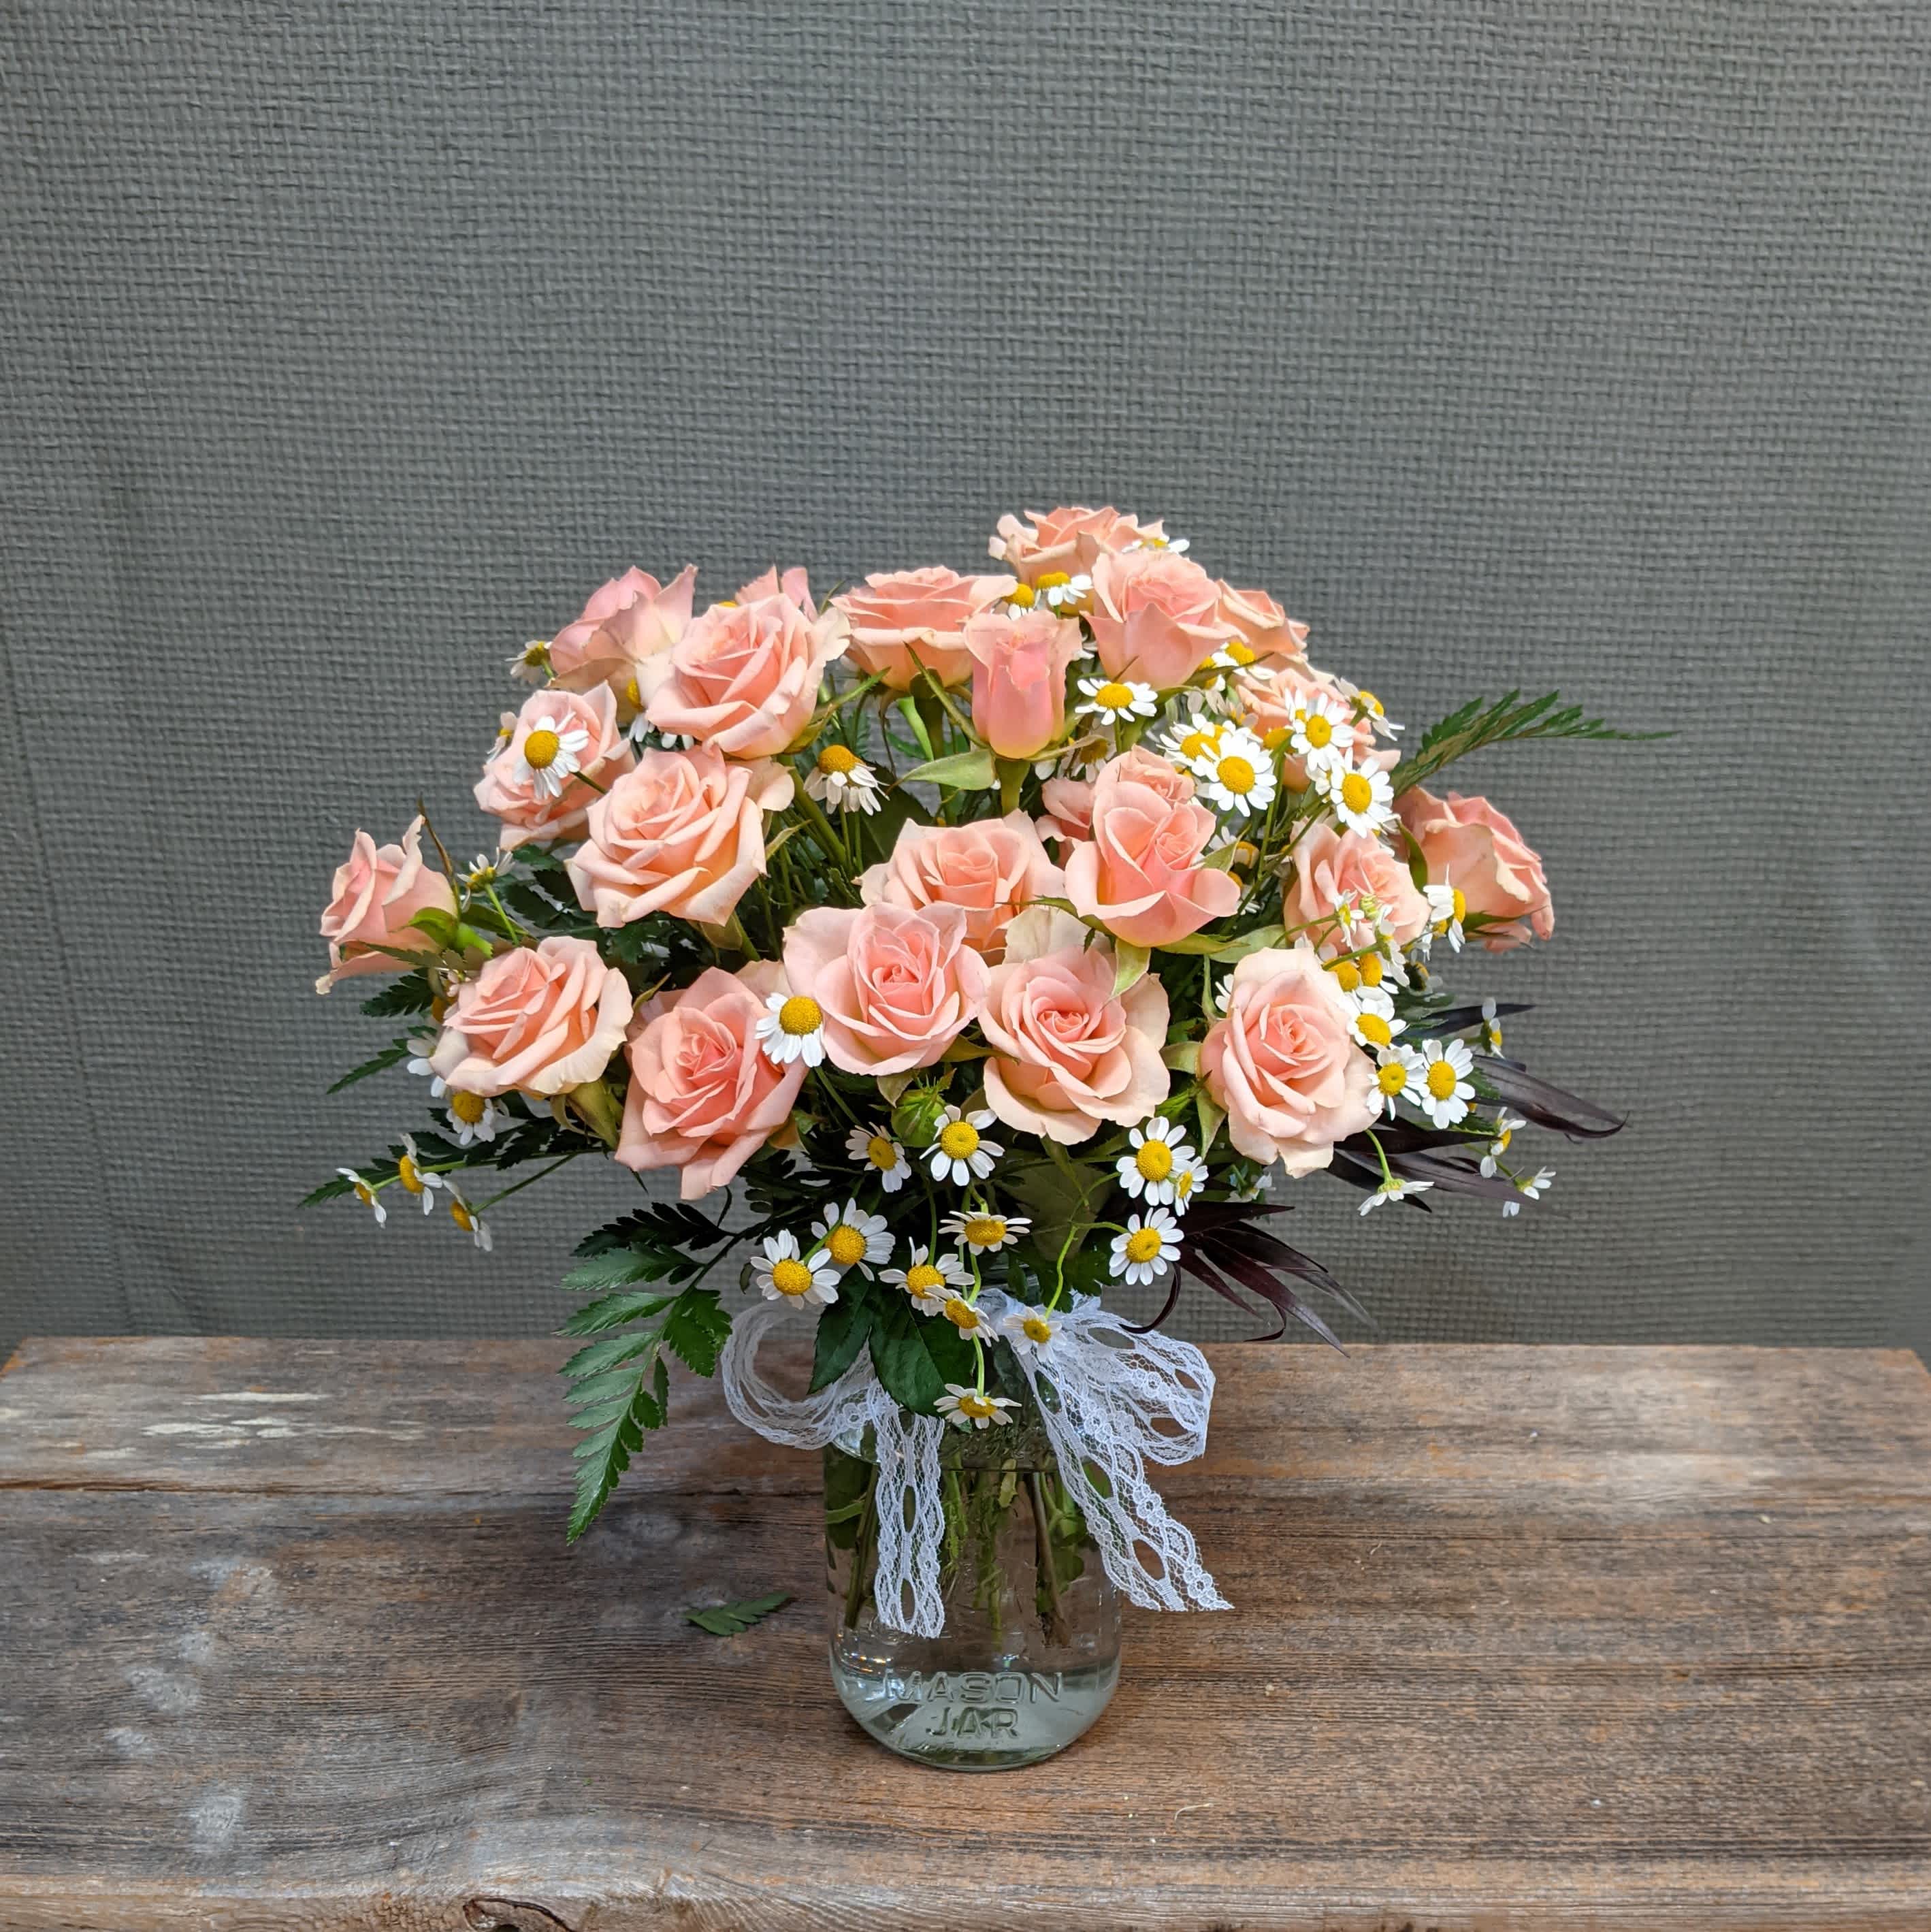 Joyful Spray - This arrangement of spray roses is a joy to give and to get. The small spray roses are as fun as they are beautiful and together with daisy matricaria make a whimsical design your mom is sure to love. It is set in a mason jar which is perfect for breakfast in bed, or upgrade to Premium for a larger centerpiece for family dinner. Please let us know if you have color requests in the special instructions.